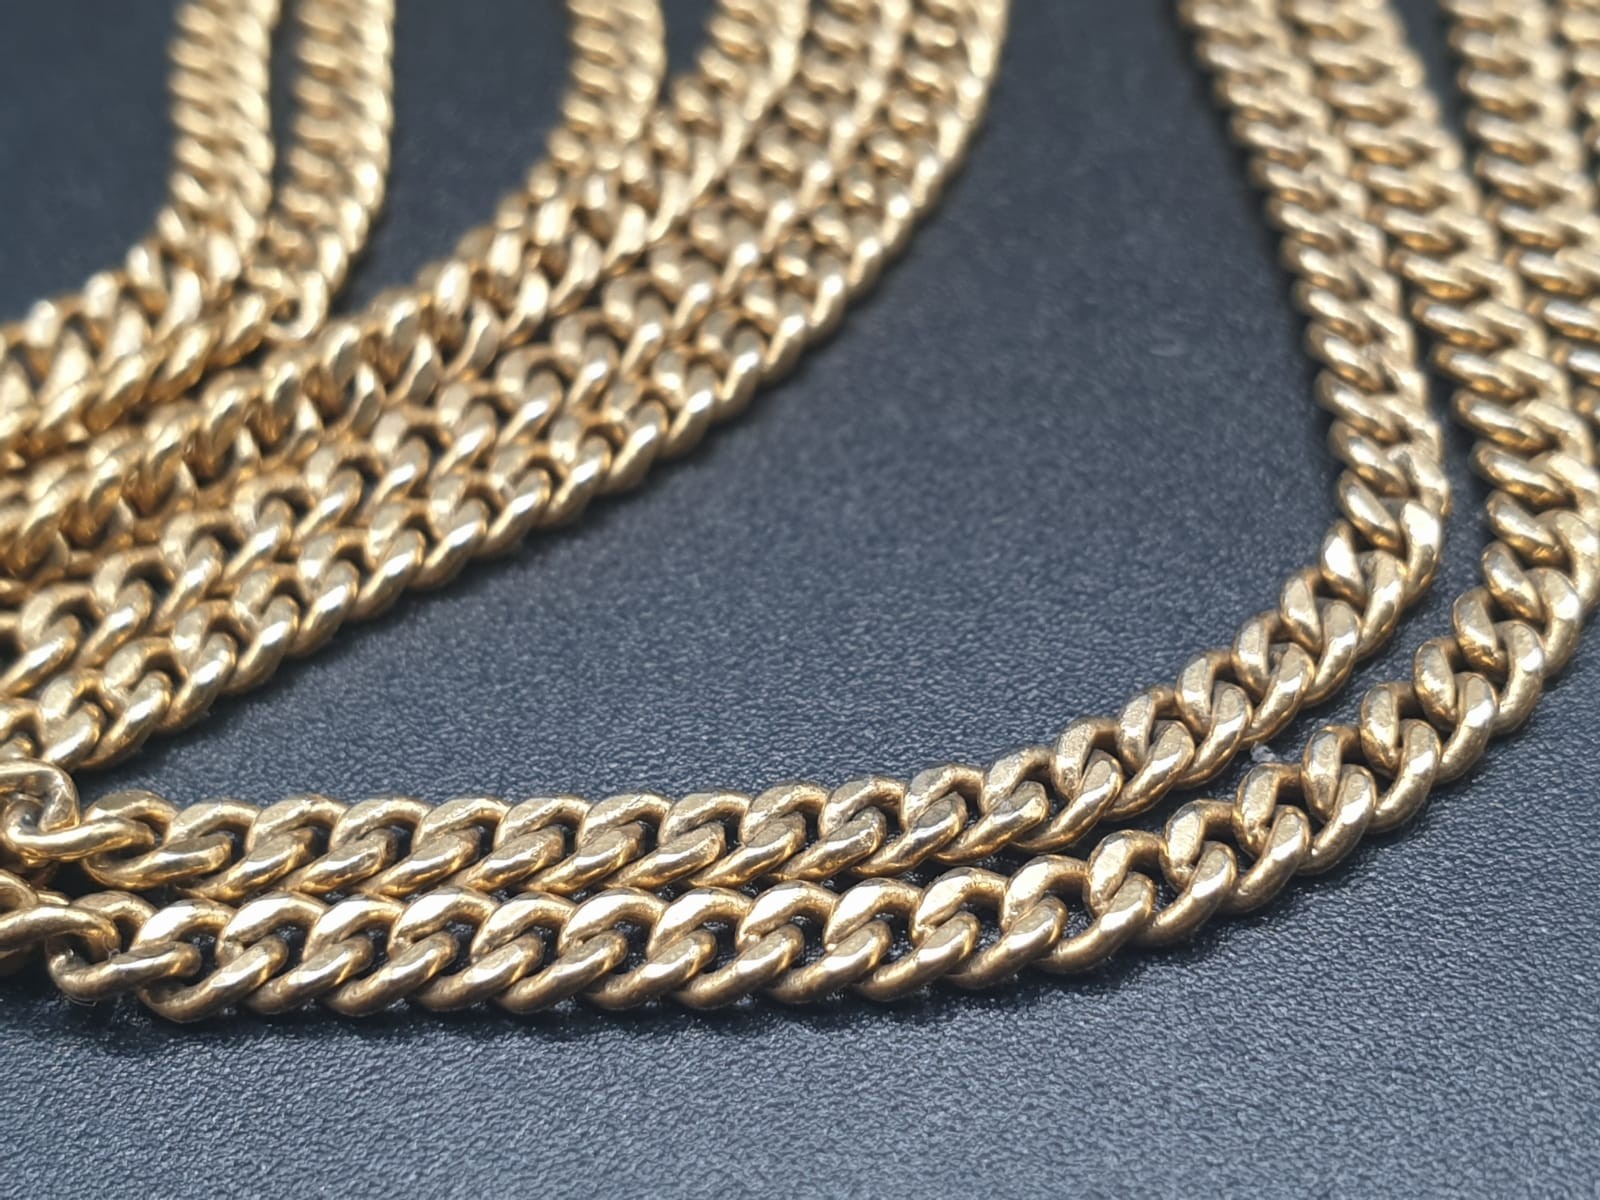 yellow metal chain 280 cms long and 44gms in weight - Image 2 of 4